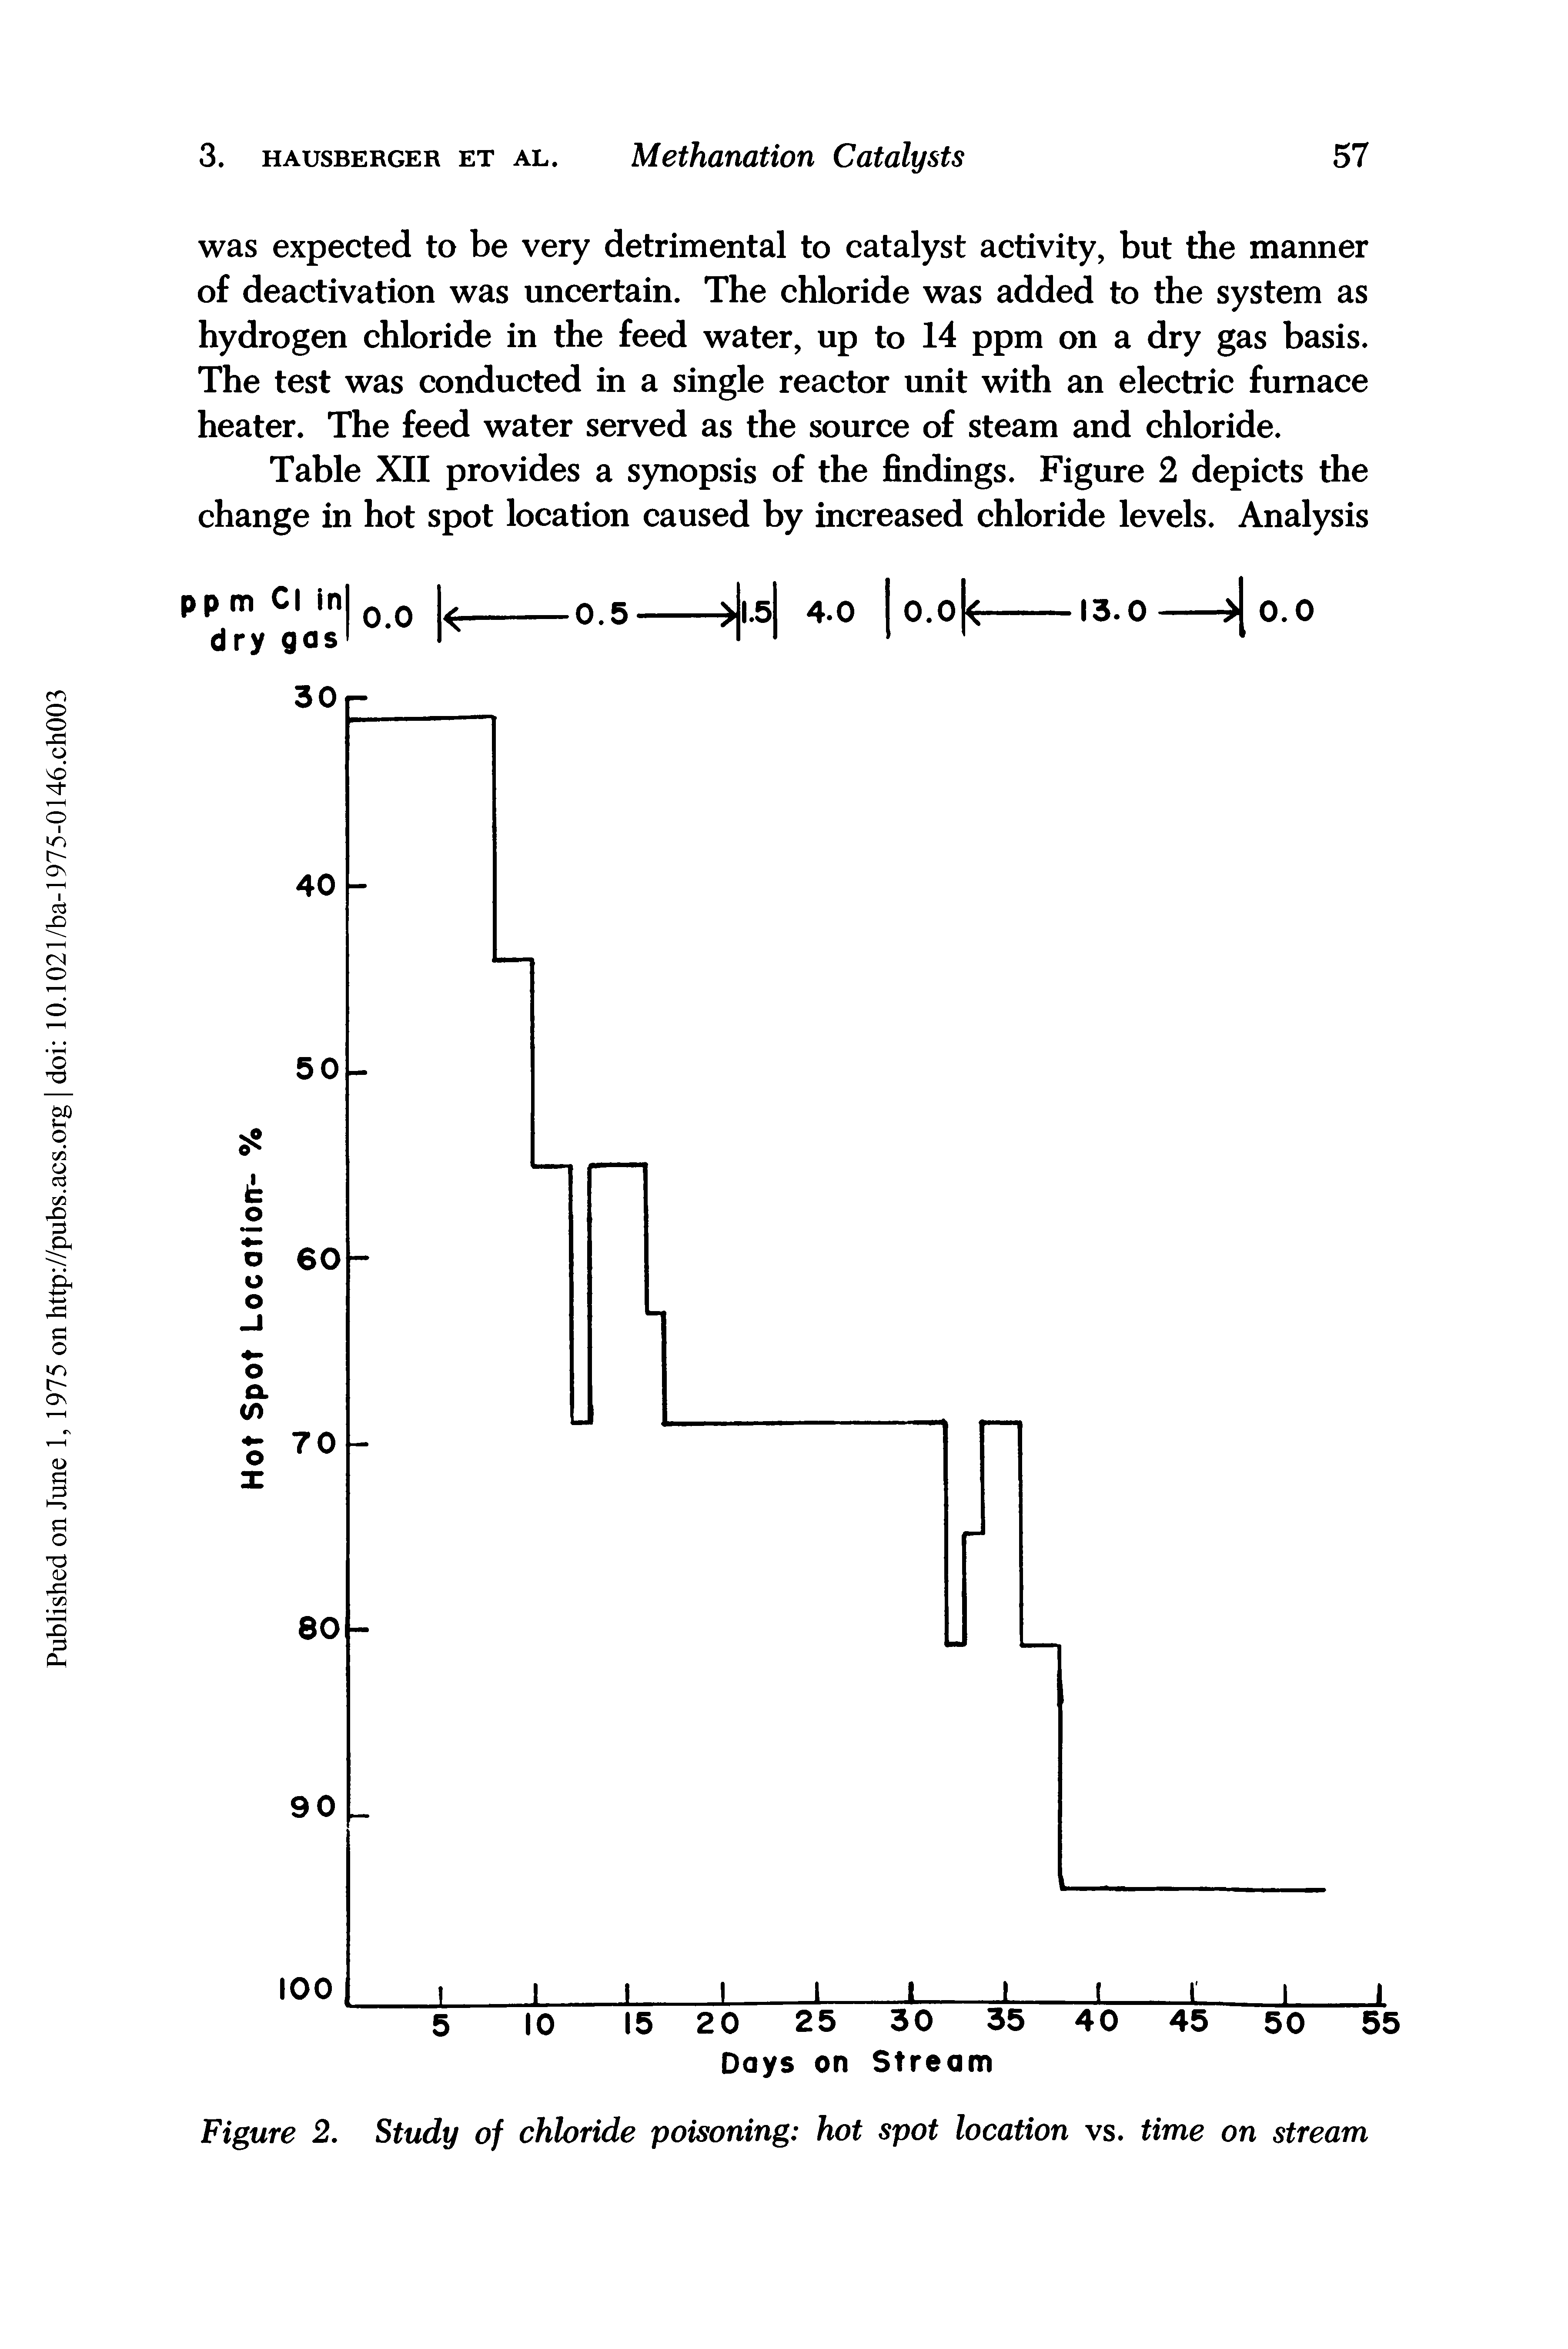 Table XII provides a synopsis of the findings. Figure 2 depicts the change in hot spot location caused by increased chloride levels. Analysis...